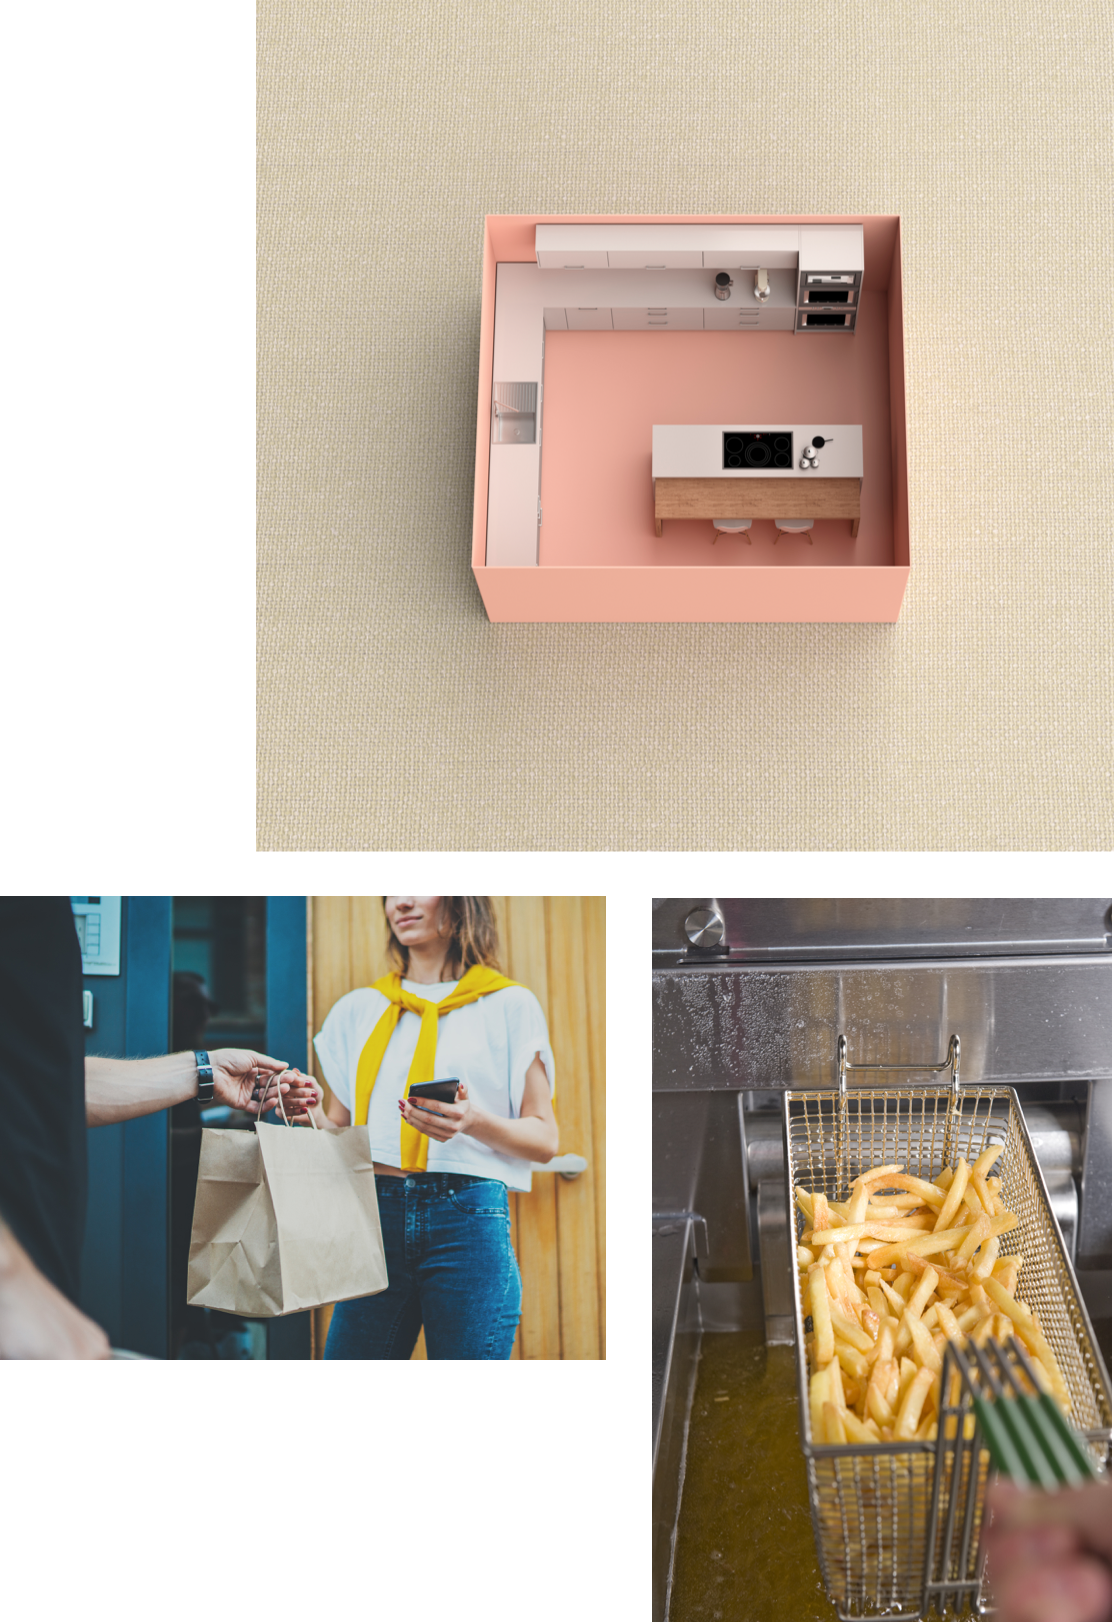 model kitchen, handing off food delivery, cooking french fries.